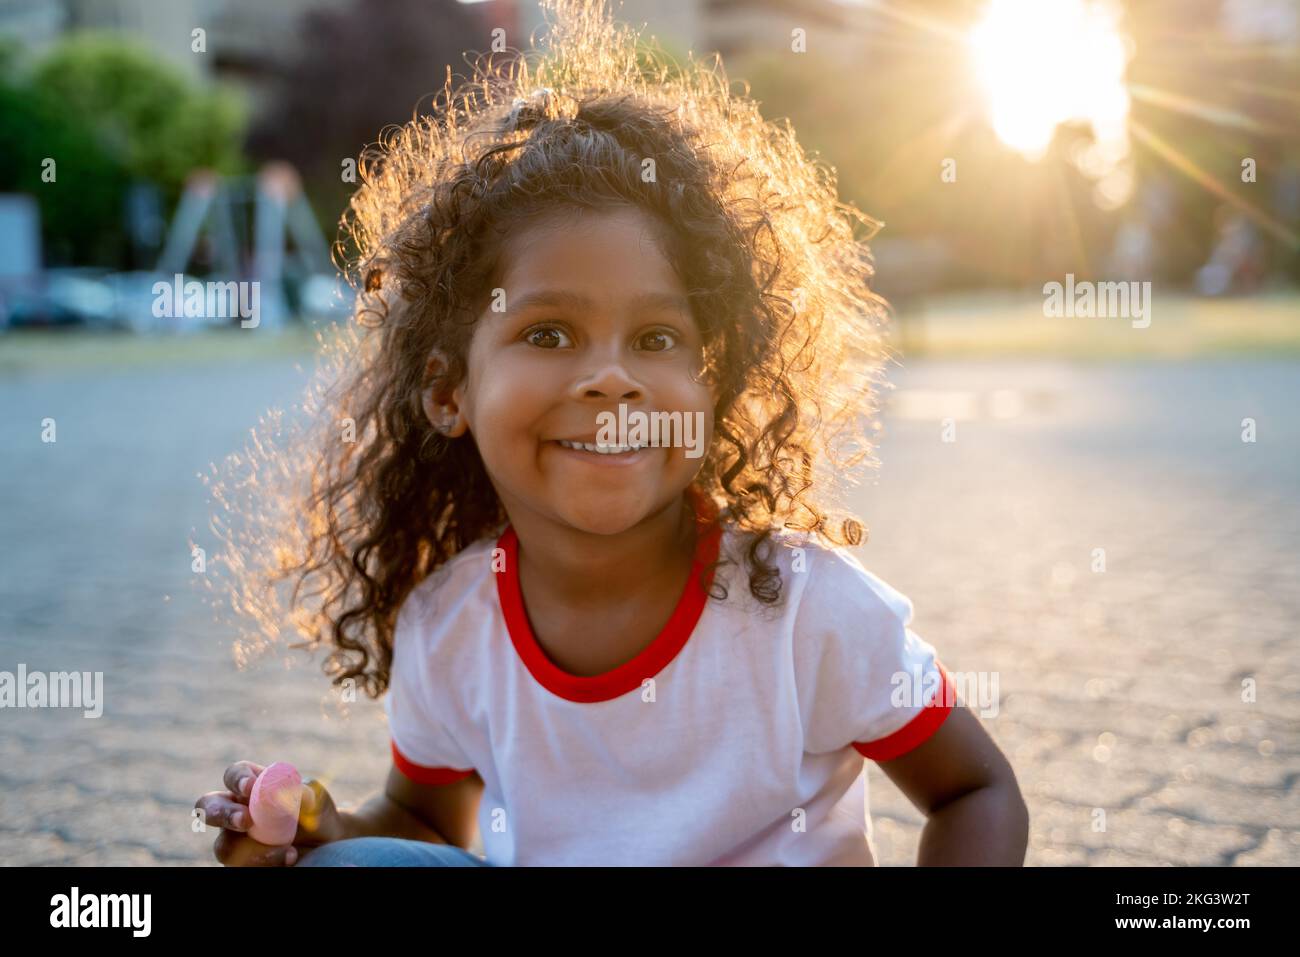 Kid posing for the camera during a creative outdoor activity Stock Photo